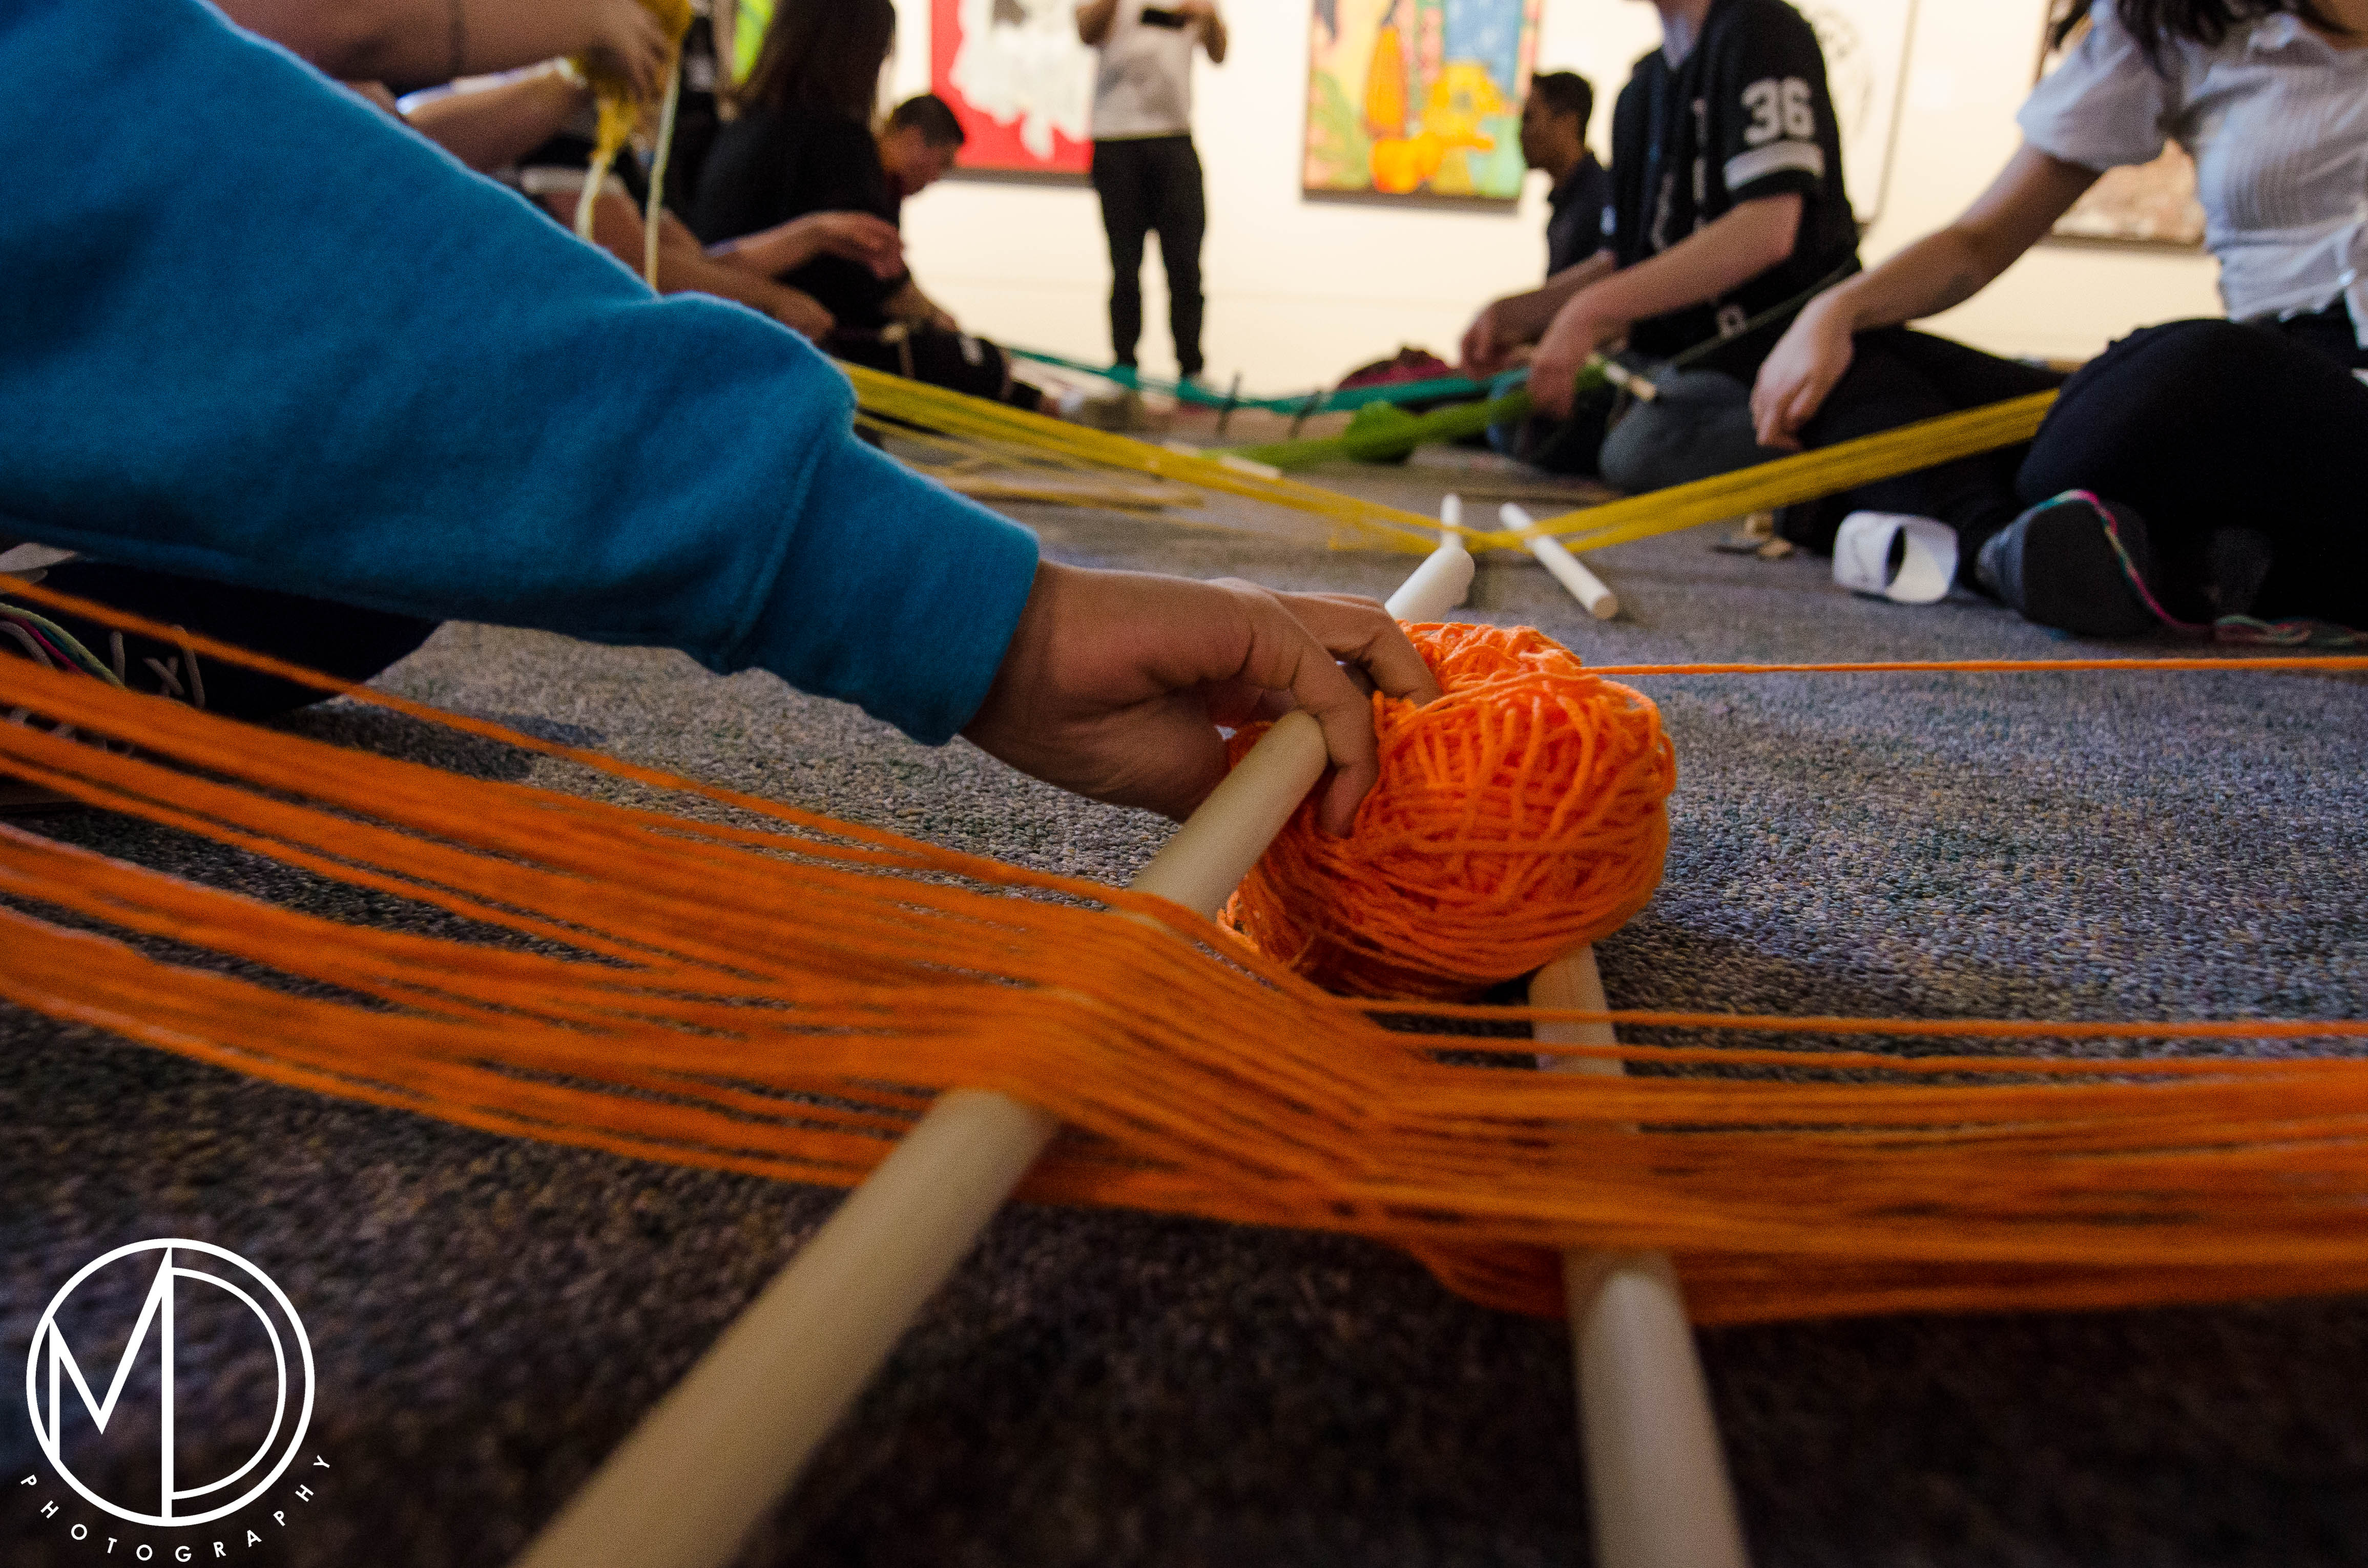 Guests participating in the weaving activity. (c) Field Museum of Natural History - CC BY-NC 4.0